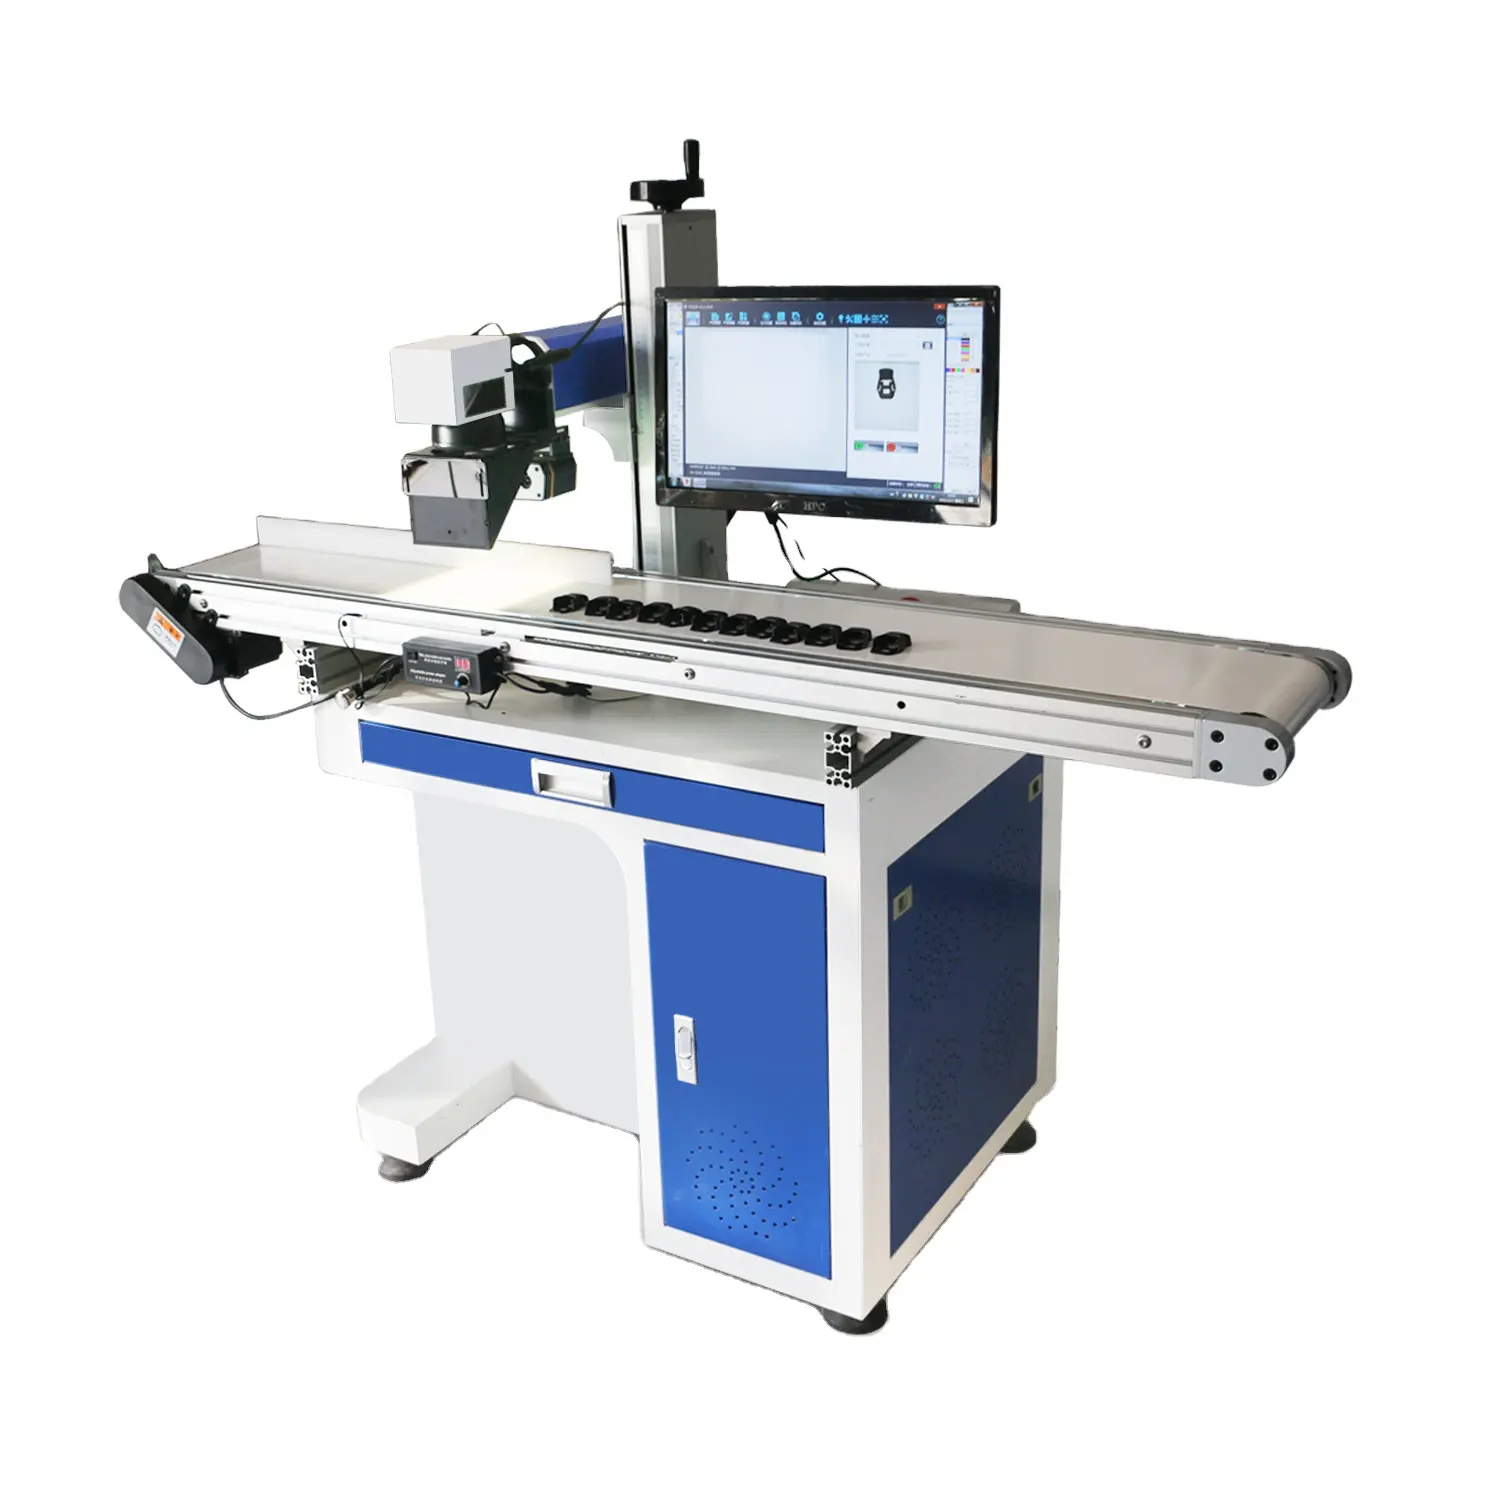 all in on Camera CCD Visual Positioning Automatic Focus Vision System Fiber Laser Marking Machine Engraving Machine